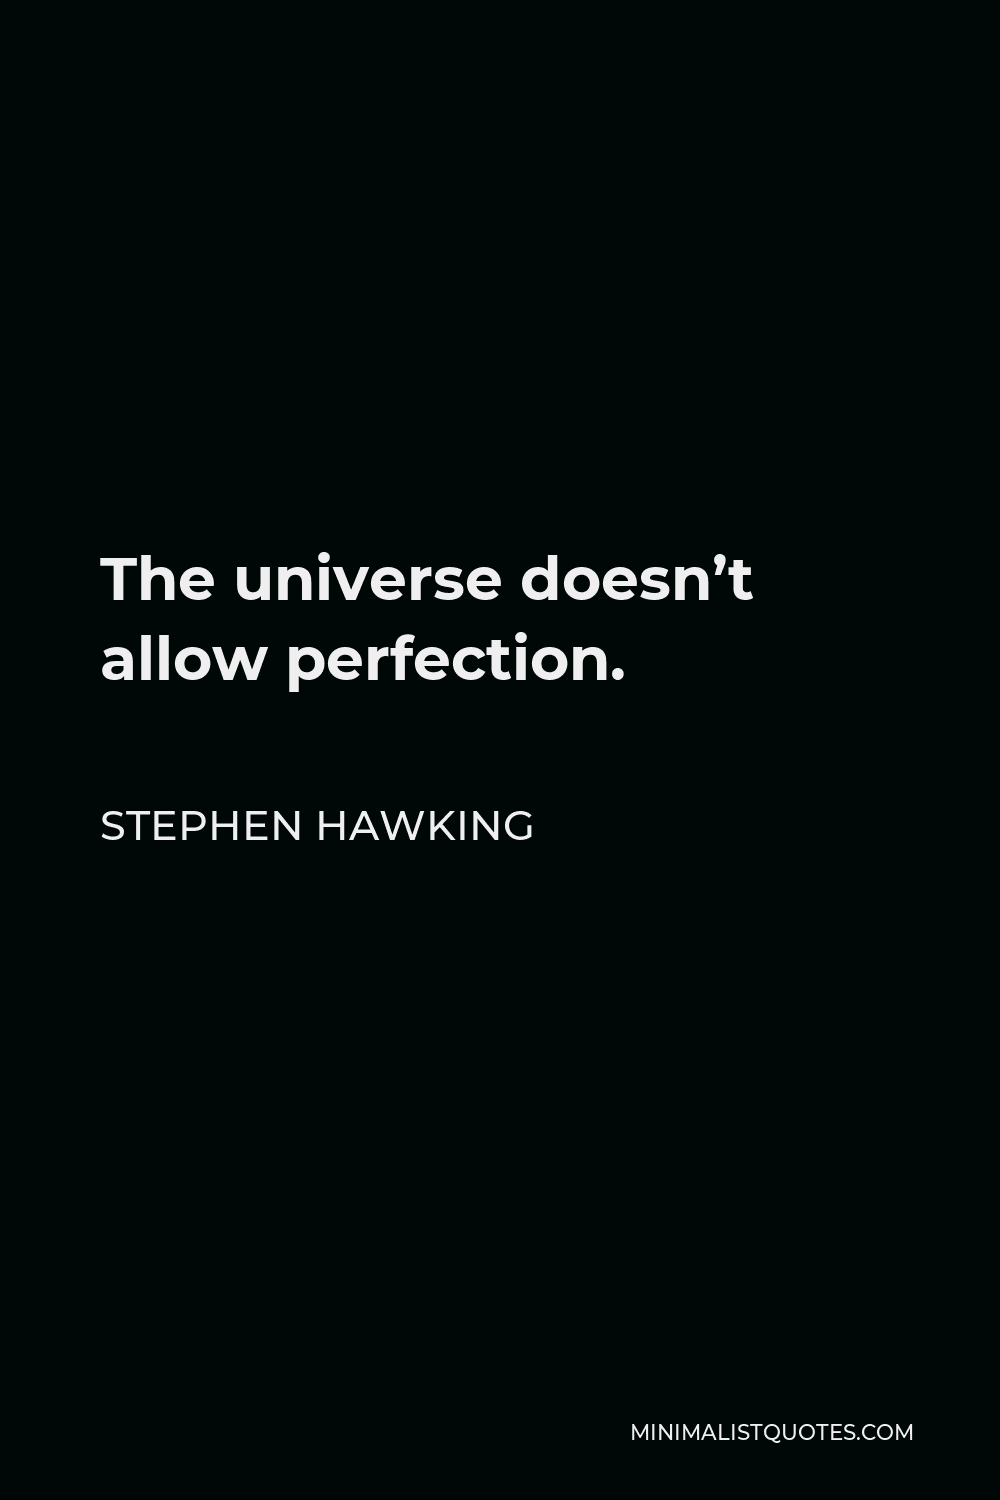 Stephen Hawking Quote - The universe doesn’t allow perfection.